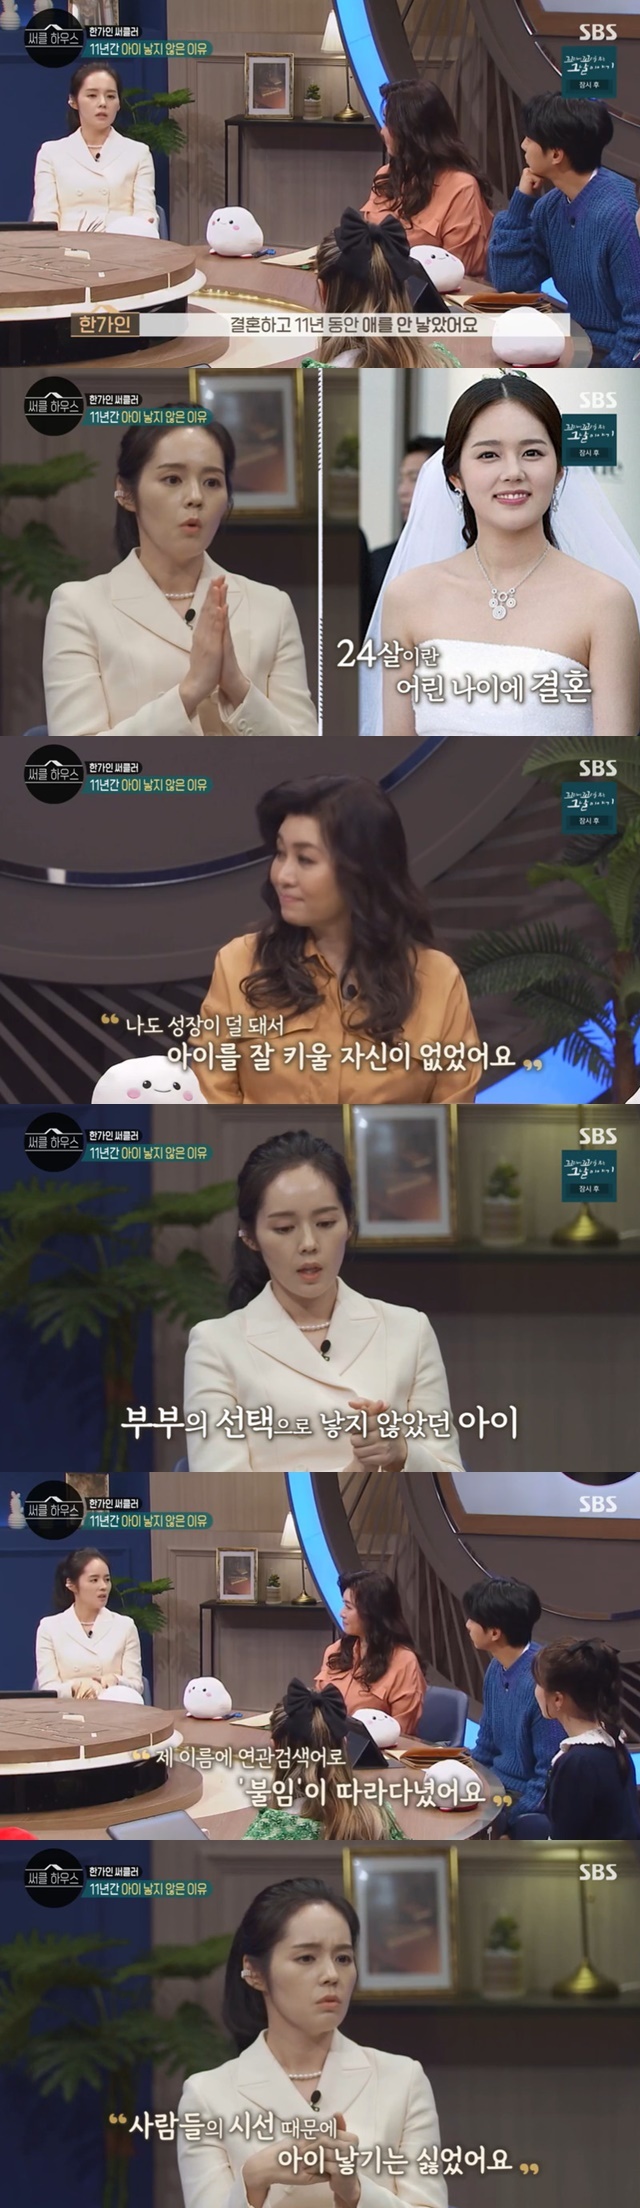 Han Ga-in once confessed that Fathers Affair was a related search term.Han Ga-in shared his story with the speaker and told his story without hesitation at the SBS Youth Counseling Project Circle House, which was broadcast on February 24th.On this day, a 26-year-old non-love middle school teacher, Lee, came to the question, Can not you mature if you do not love?I feel lonely from that point on, he said, and I am full of myself now, and I am so happy with my life now.When Lee Seung-gi asked why he declared non-love, he said, I want to inform the people around me by saying non-love. You do not have to try to me anymore.I think that I can prevent the wounds of those who like me by doing so. But I think my daughter would approve if she was non-love, and shes good at non-love and non-marriage, Han Ga-in said.I hope that I will not experience such a thing because it is difficult to love in marriage, love and living. I want to question other accomplishments of my work, and I have a very difficult love-emotional fight. I dont know what will happen.I grew up once, dating, getting married, having a baby, but I dont think I was immature and anyone else before I was dating.Han Ga-in then said, Ive been married for eleven years, and Ive been married for twenty-two years, and Ive been married for twenty-four years, and Ive never really had the confidence to raise a child well when I was young.They agreed with her husband and didnt have a baby, and every time they interviewed, they said they were having a bad relationship.Faders Affair followed it as a related search term. 